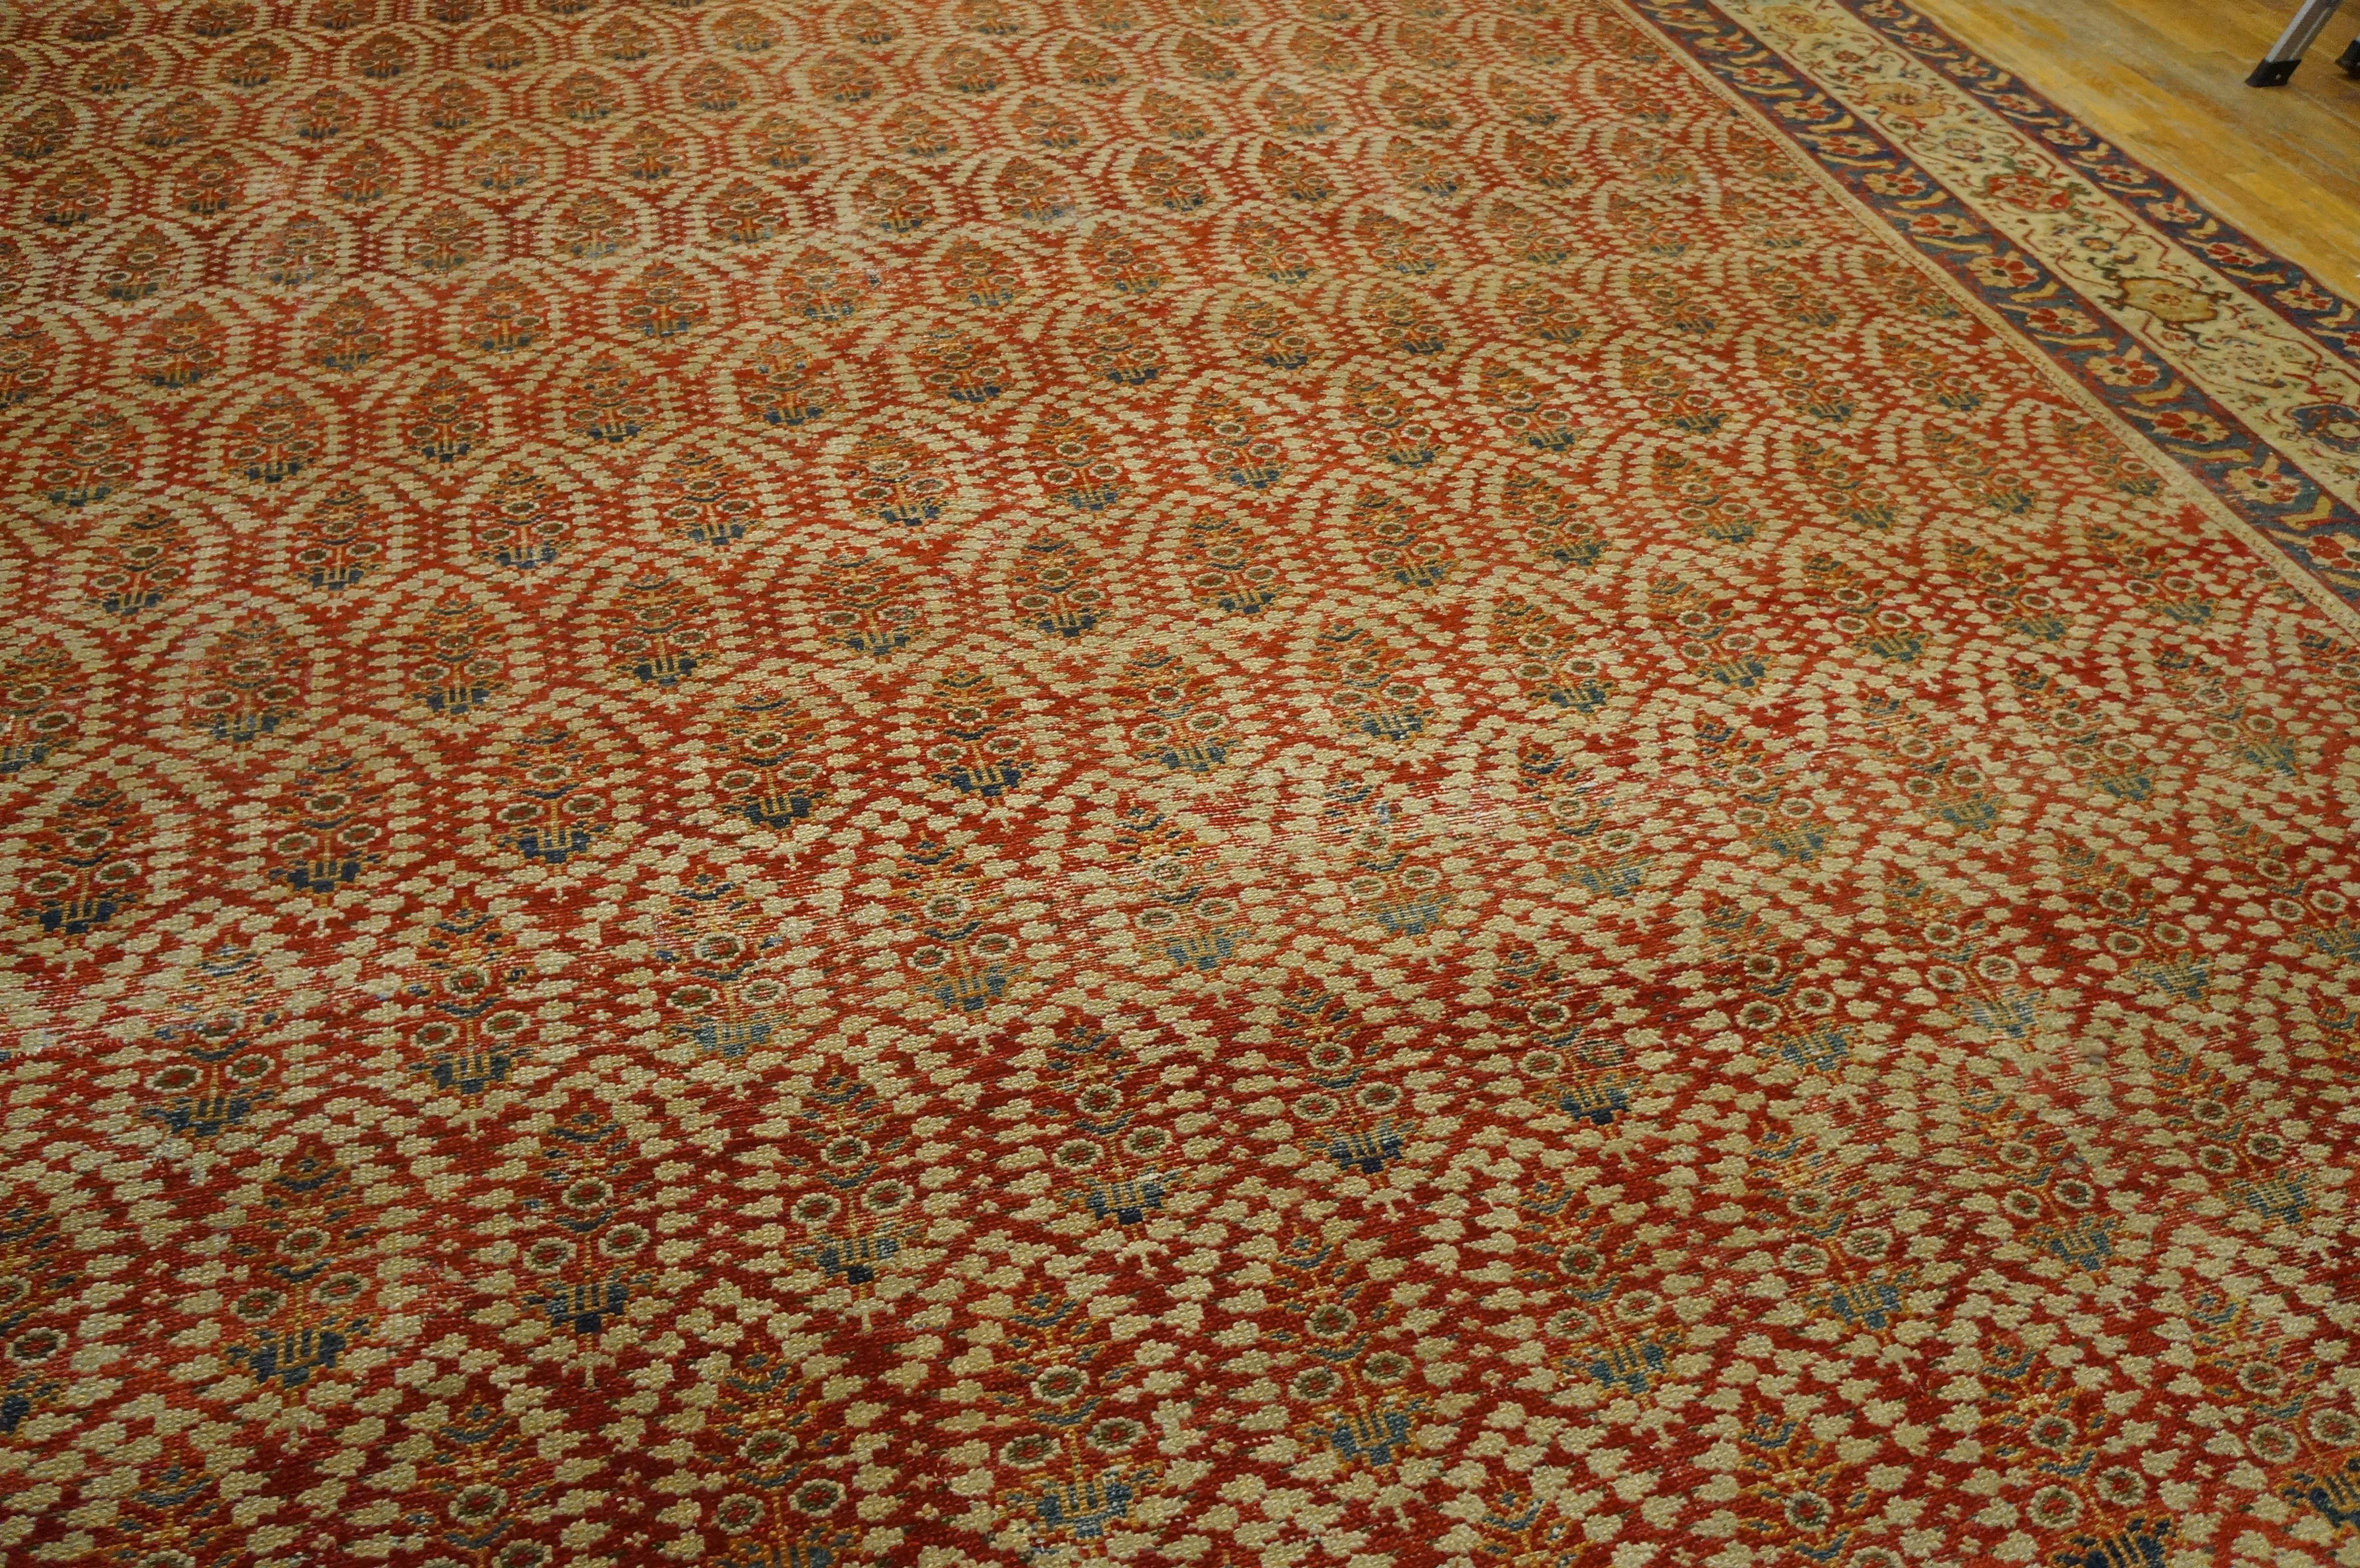 Early 20th Century Persian Malayer Carpet ( 13'2